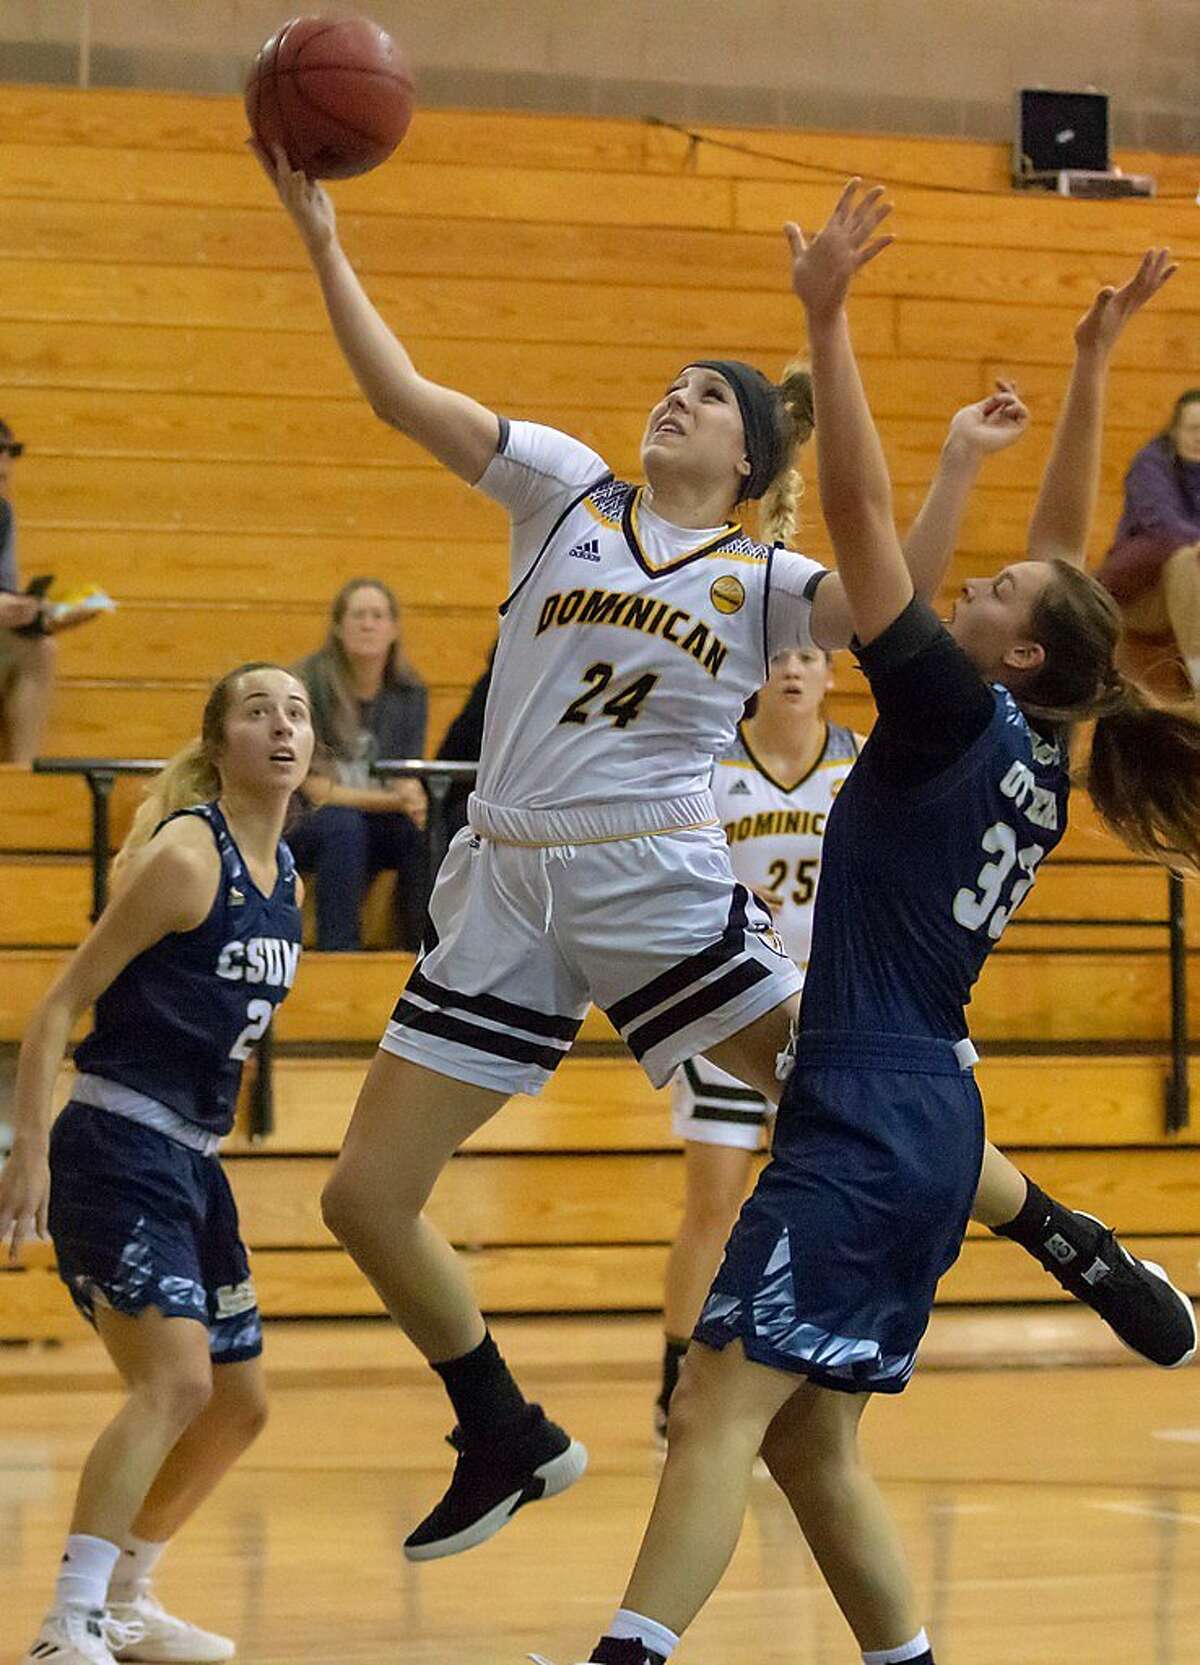 Natalie Diaz, a 6-foot-1 guard at Dominican University in San Rafael, is the No. 3 scorer in NCAA Division II with a 26.0-point average.